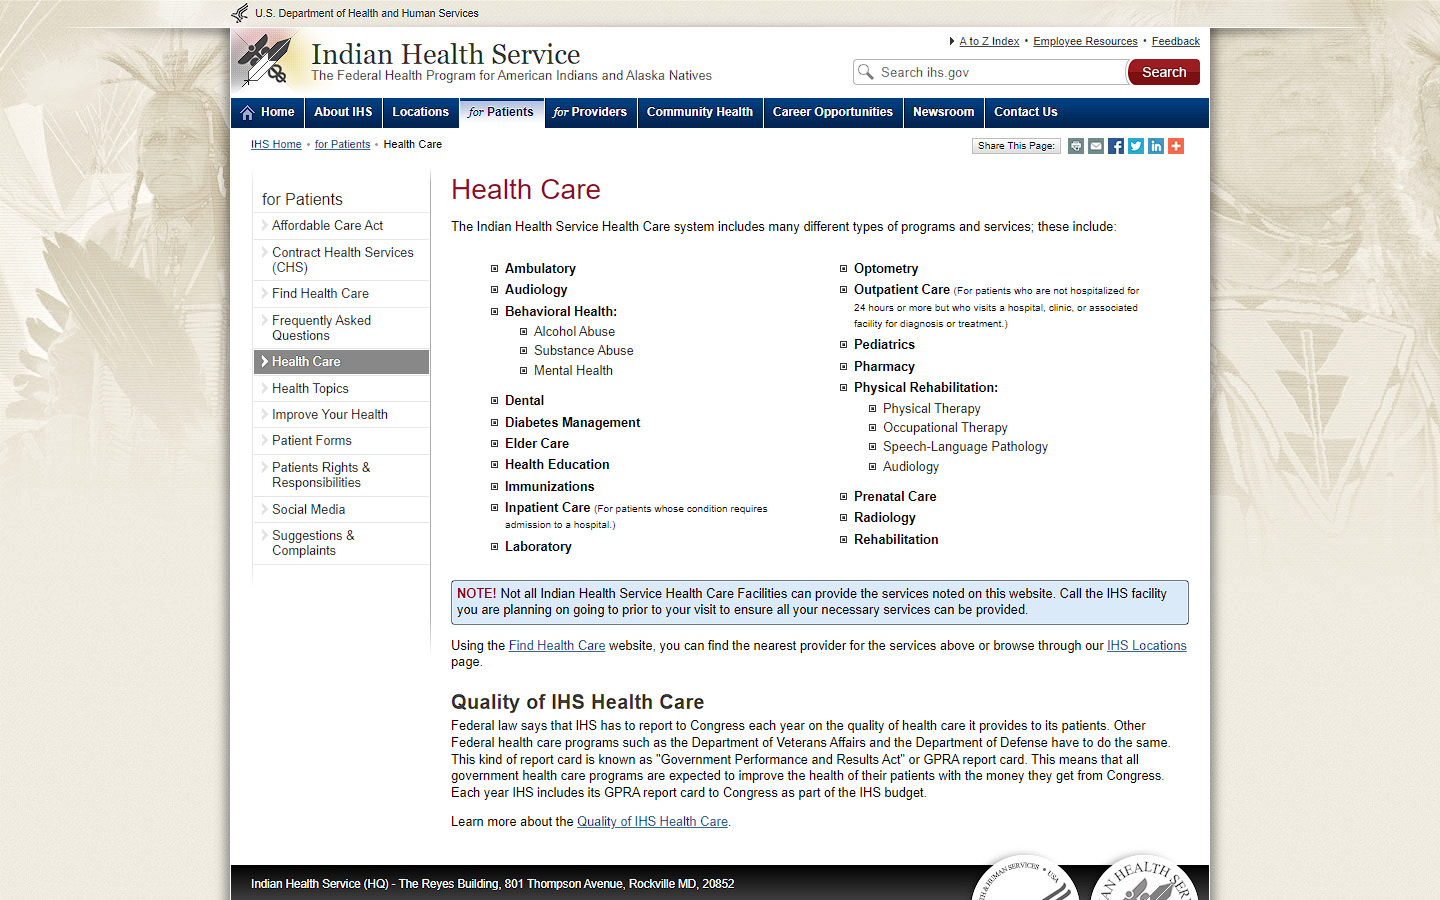 ihs.gov health care page